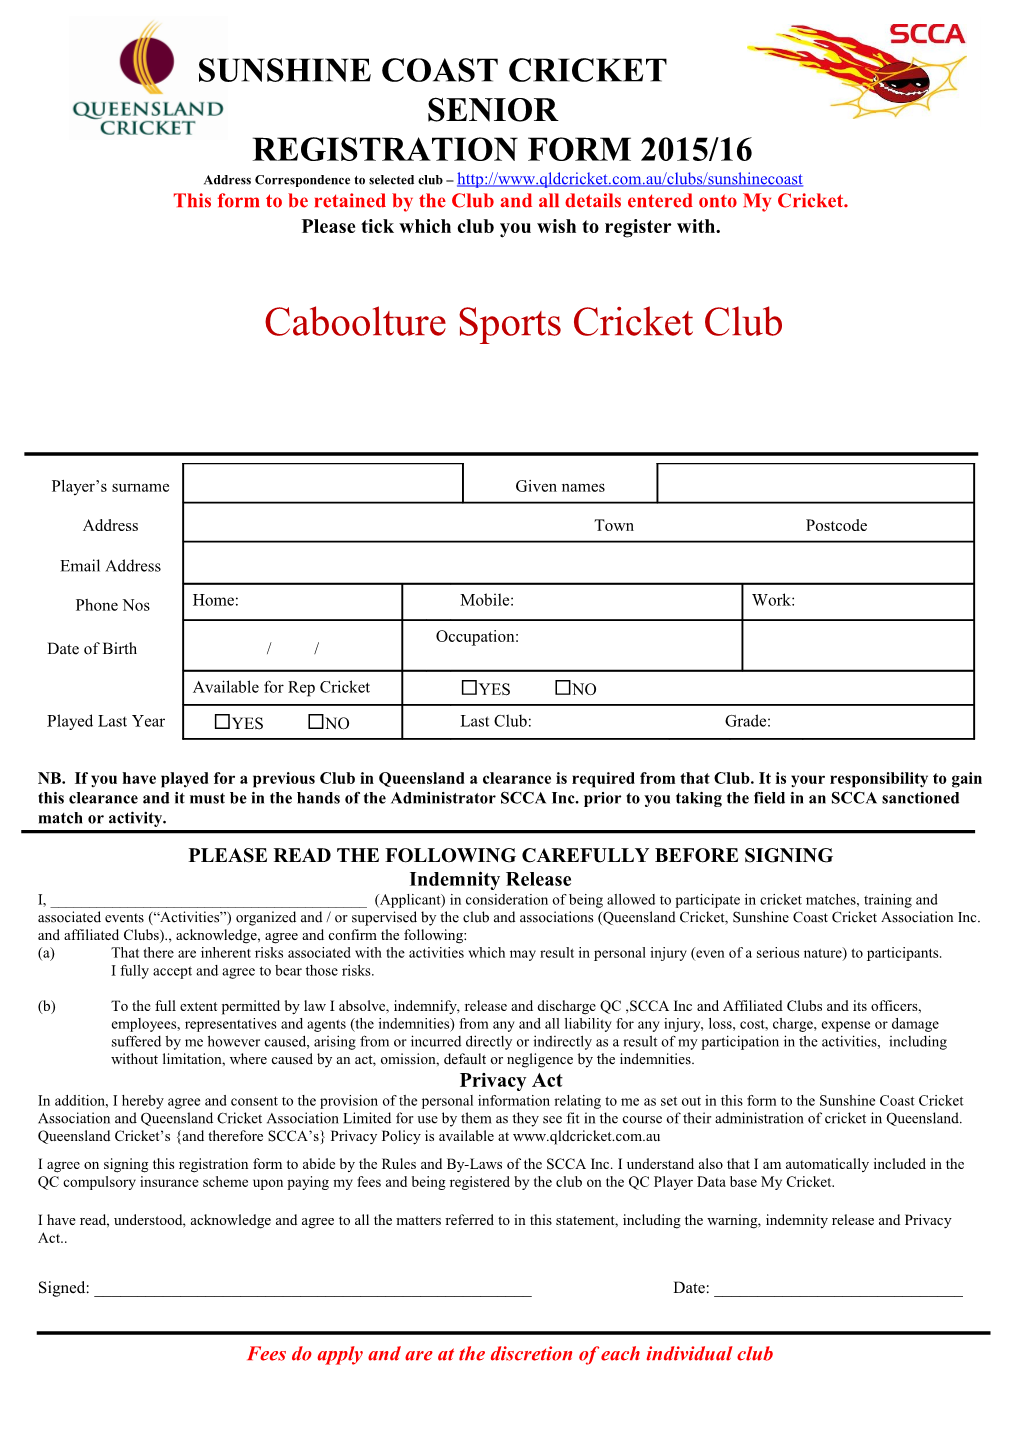 This Form to Be Retained by the Club and All Details Entered Onto My Cricket